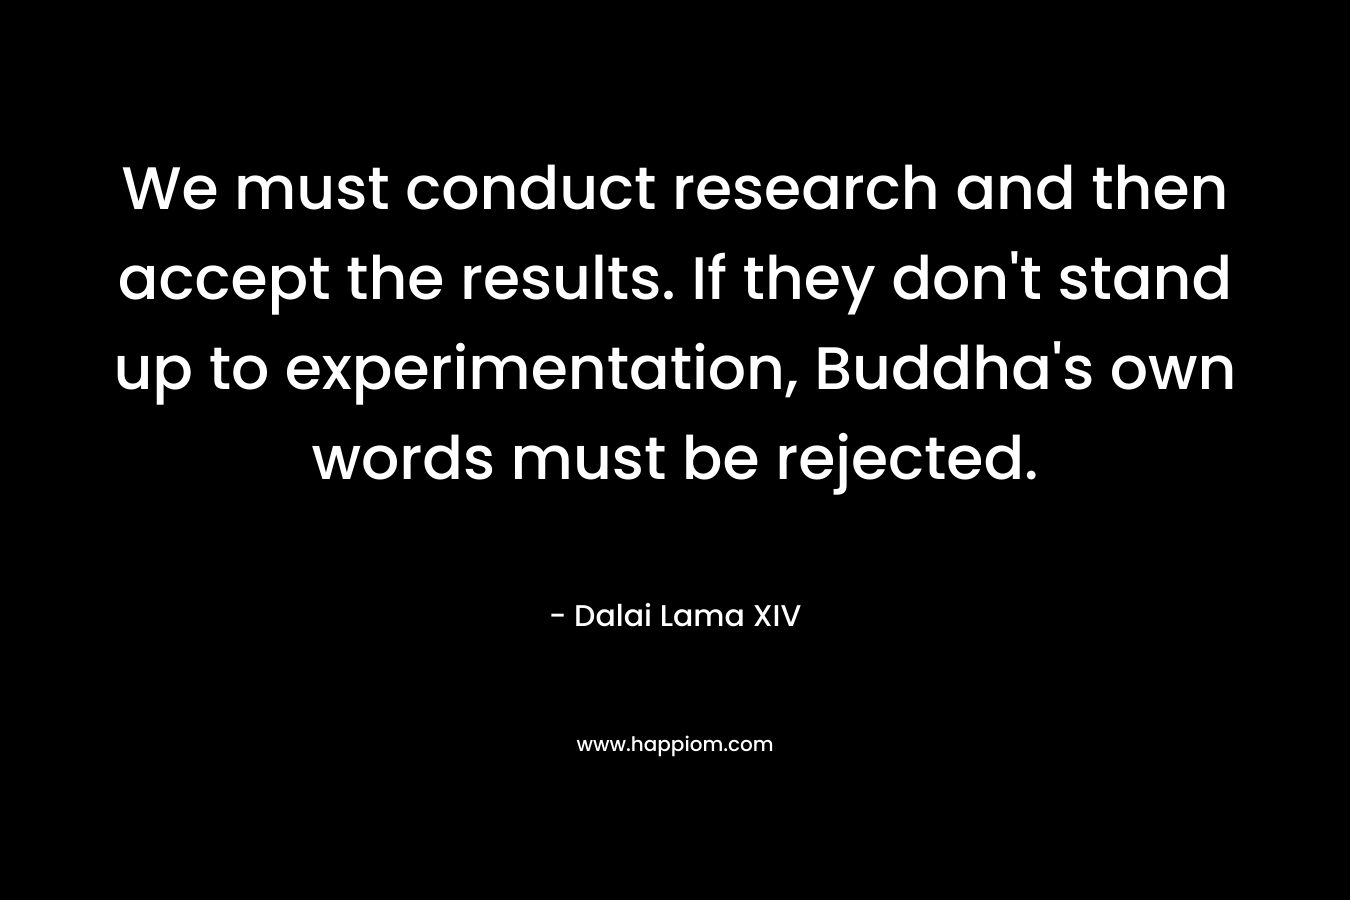 We must conduct research and then accept the results. If they don’t stand up to experimentation, Buddha’s own words must be rejected. – Dalai Lama XIV